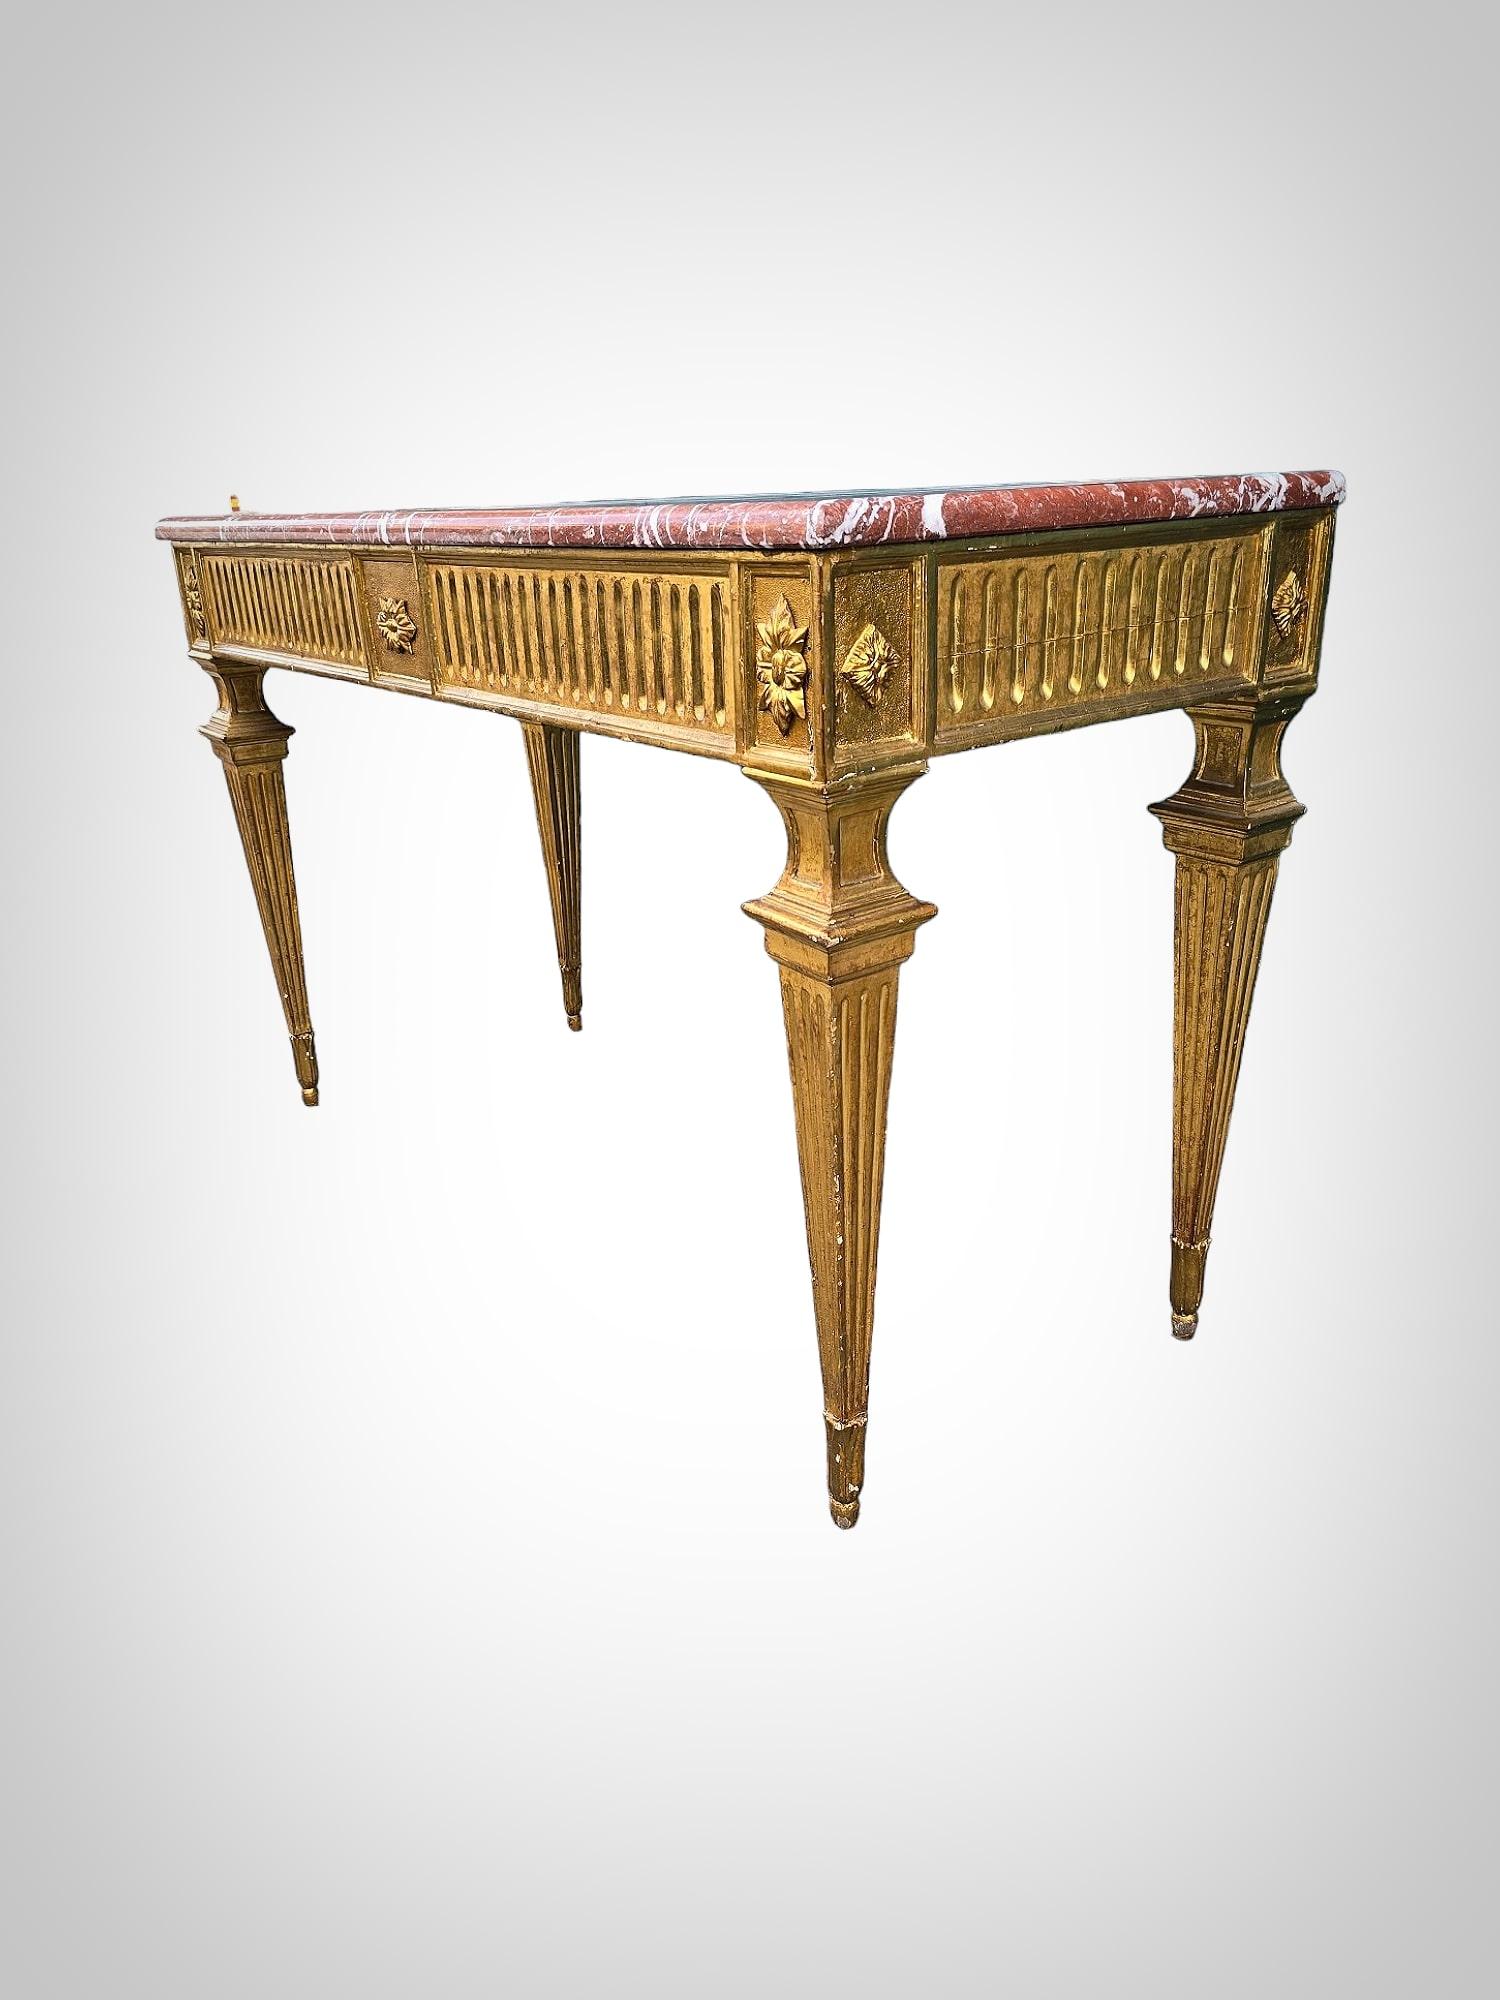 Louis XVI Period Gilded Carved Wood Console Table 18 th For Sale 5